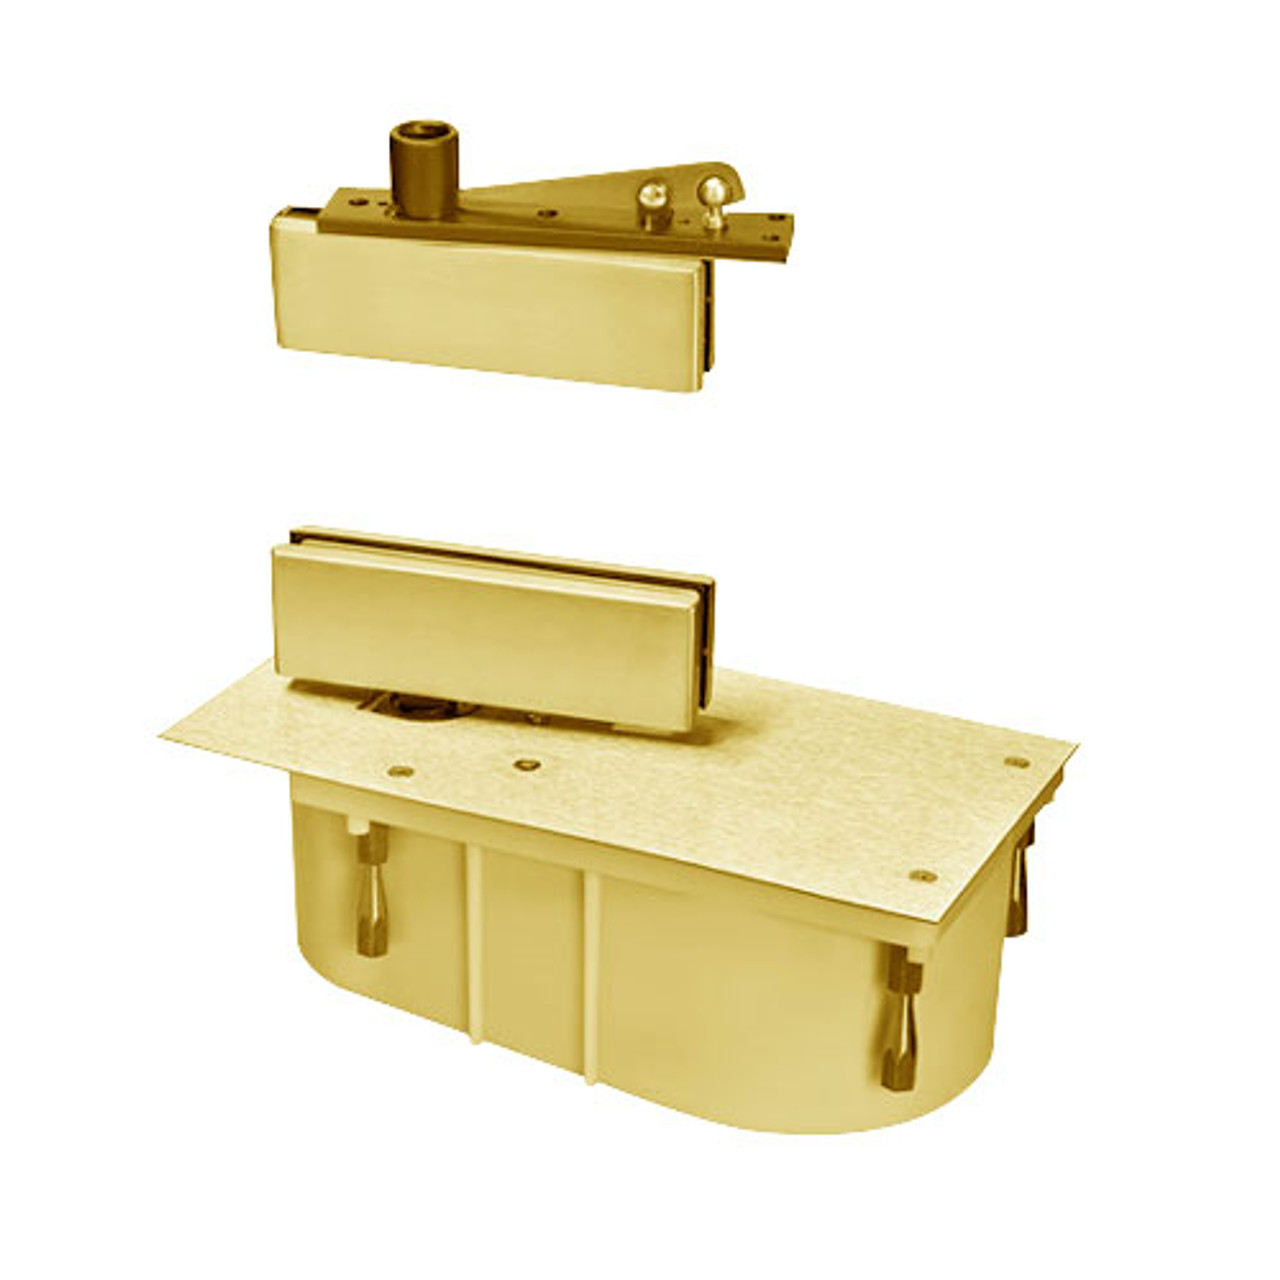 428-85N-CWF-RH-605 Rixson 428 Series Heavy Duty Single Acting Center Hung Floor Closer with Patch Fittings in Bright Brass Finish